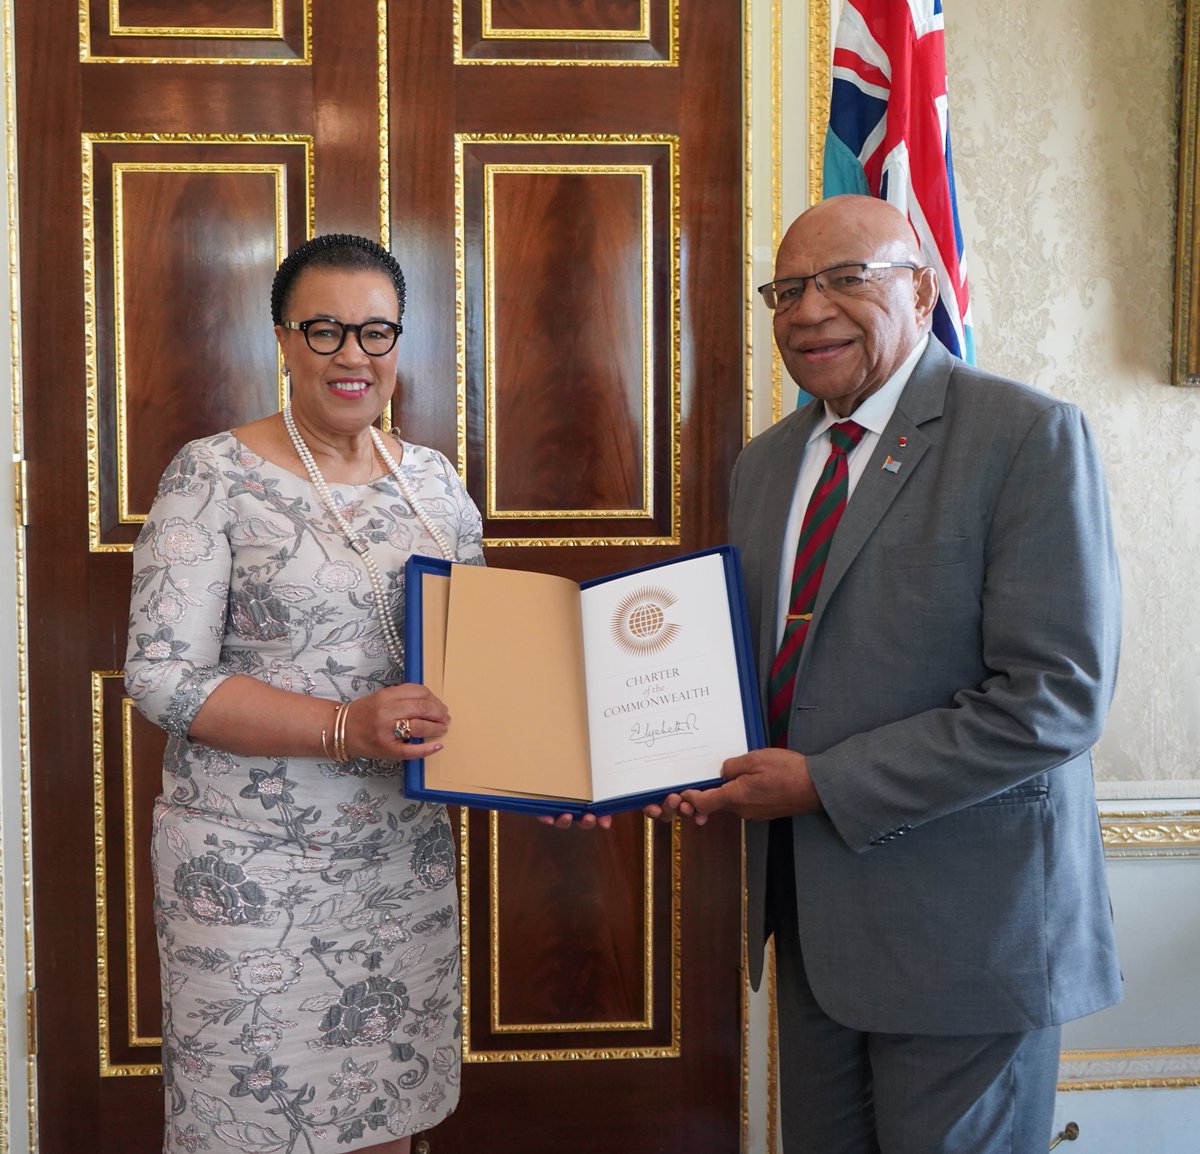 Honoured to receive the Prime Minister of Fiji, @RabukaSitiveni, at Marlborough House. We spoke about @CommonwealthSec support to small states, especially on climate change and #AI, and the upcoming #CHOGM2024 in Samoa. I also thanked him for #Fiji's leadership on ocean issues.